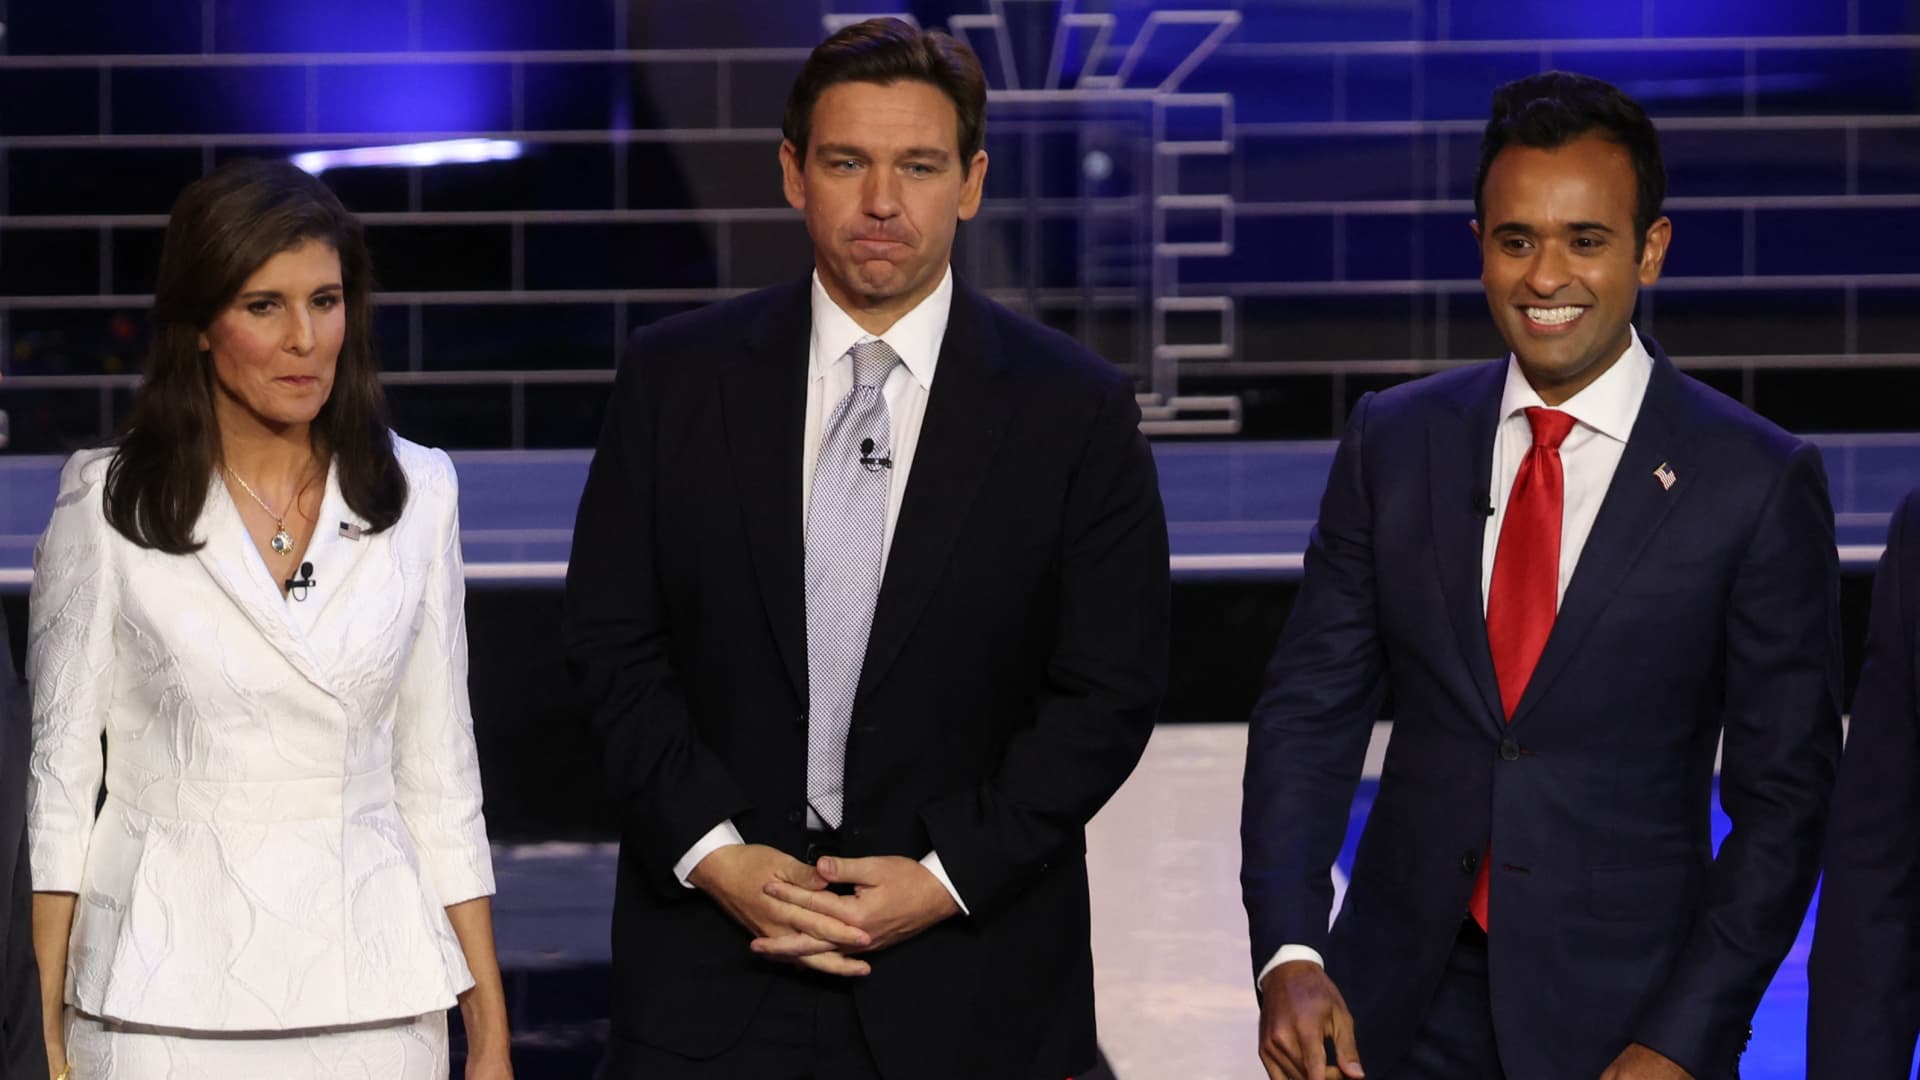 Former South Carolina Governor Nikki Haley, Florida Governor Ron DeSantis and former biotech executive Vivek Ramaswamy pose together onstage at the third Republican candidates' U.S. presidential debate of the 2024 U.S. presidential campaign hosted by NBC News at the Adrienne Arsht Center for the Performing Arts in Miami, Florida, U.S., November 8, 2023. 